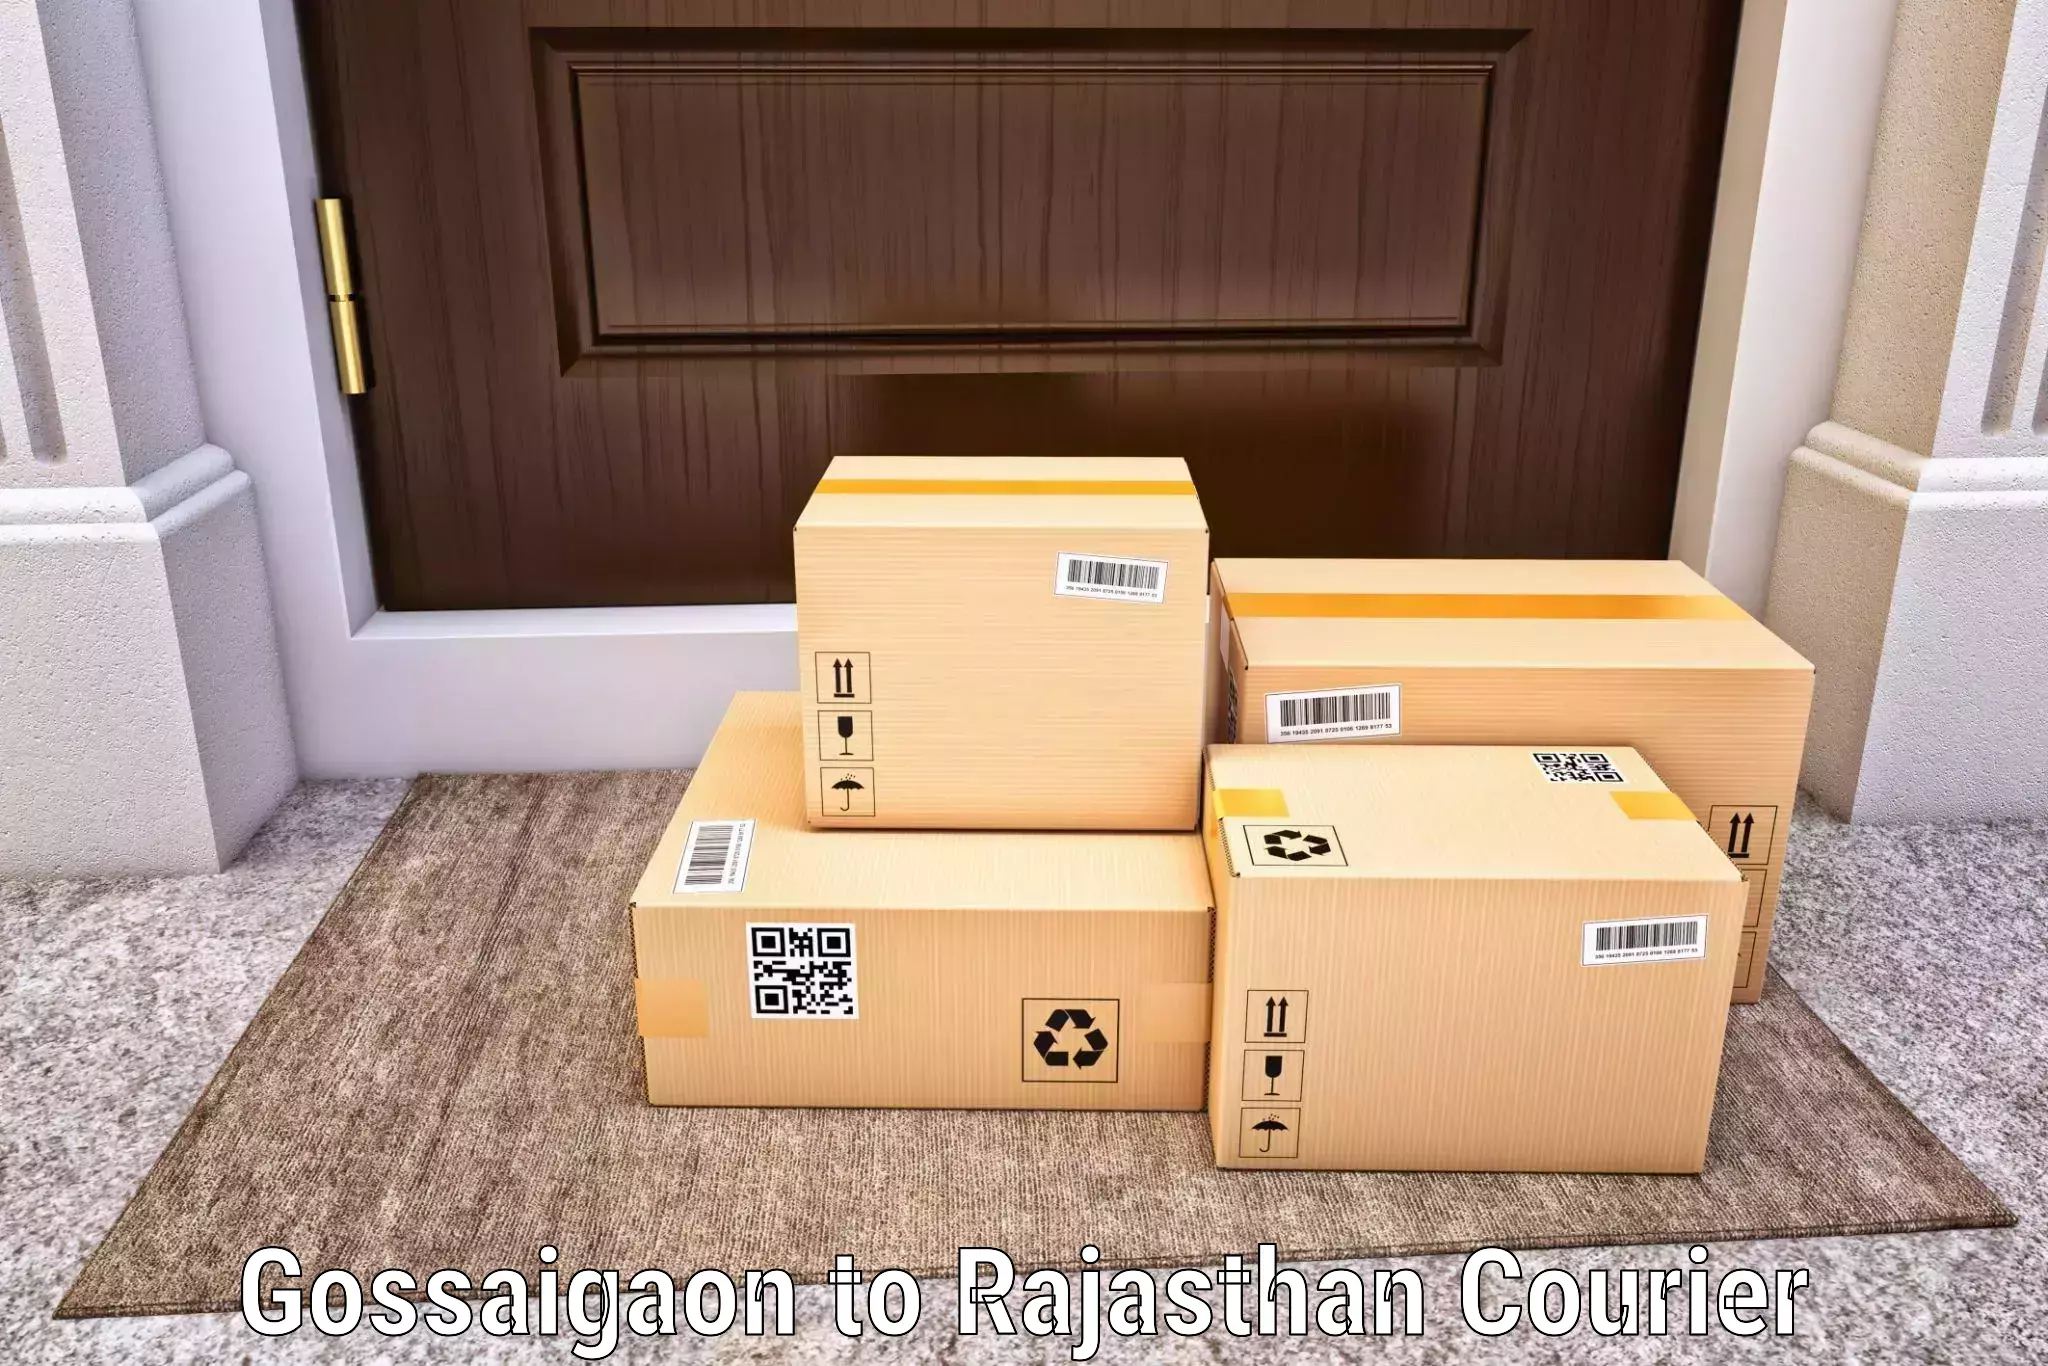 Round-the-clock parcel delivery Gossaigaon to Khandela Sikar